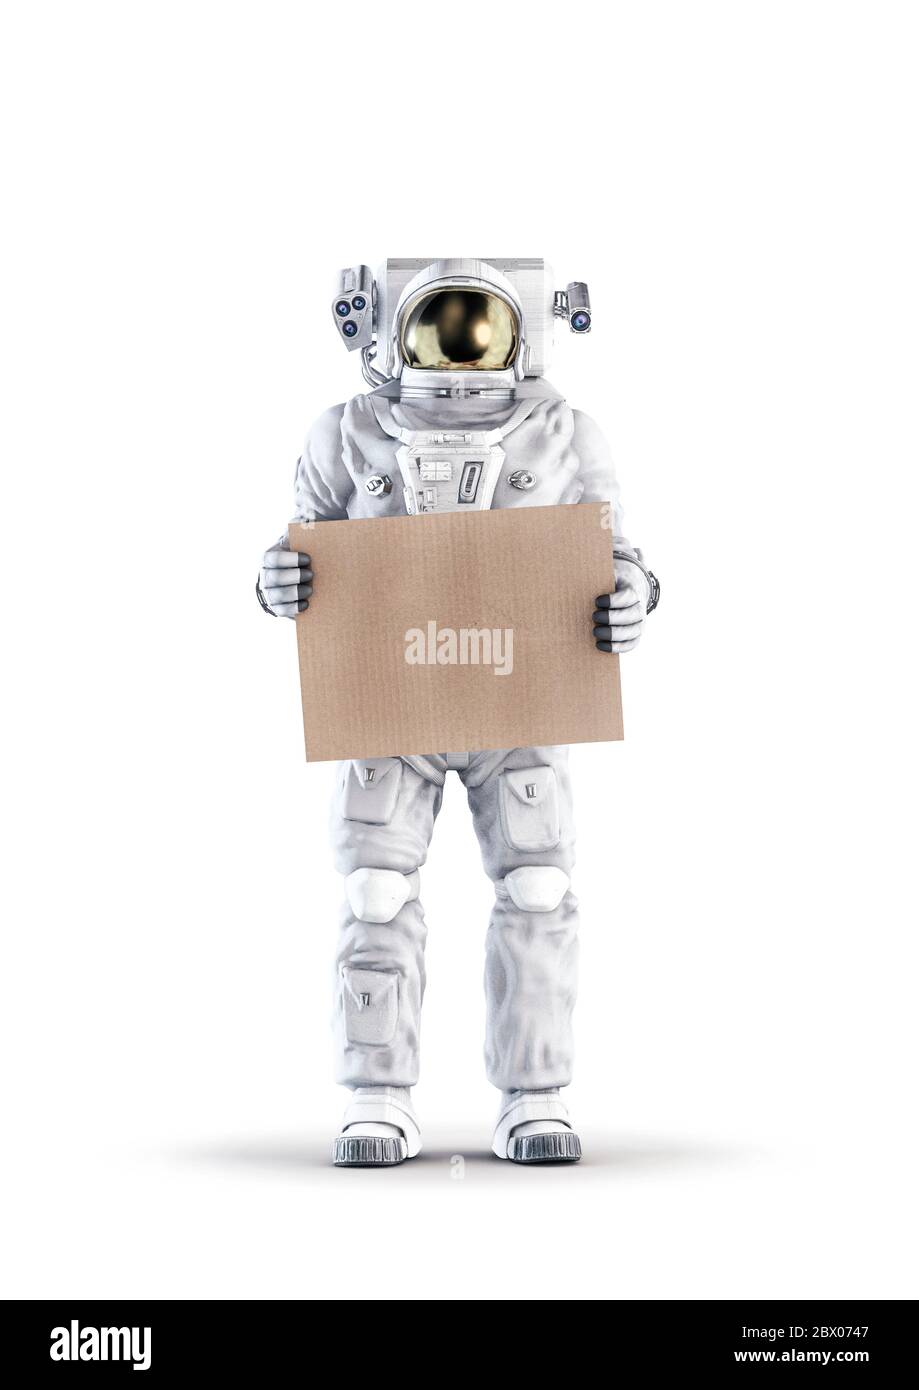 Astronaut with message / 3D illustration of space suit wearing male figure holding blank cardboard sign isolated on white studio background Stock Photo